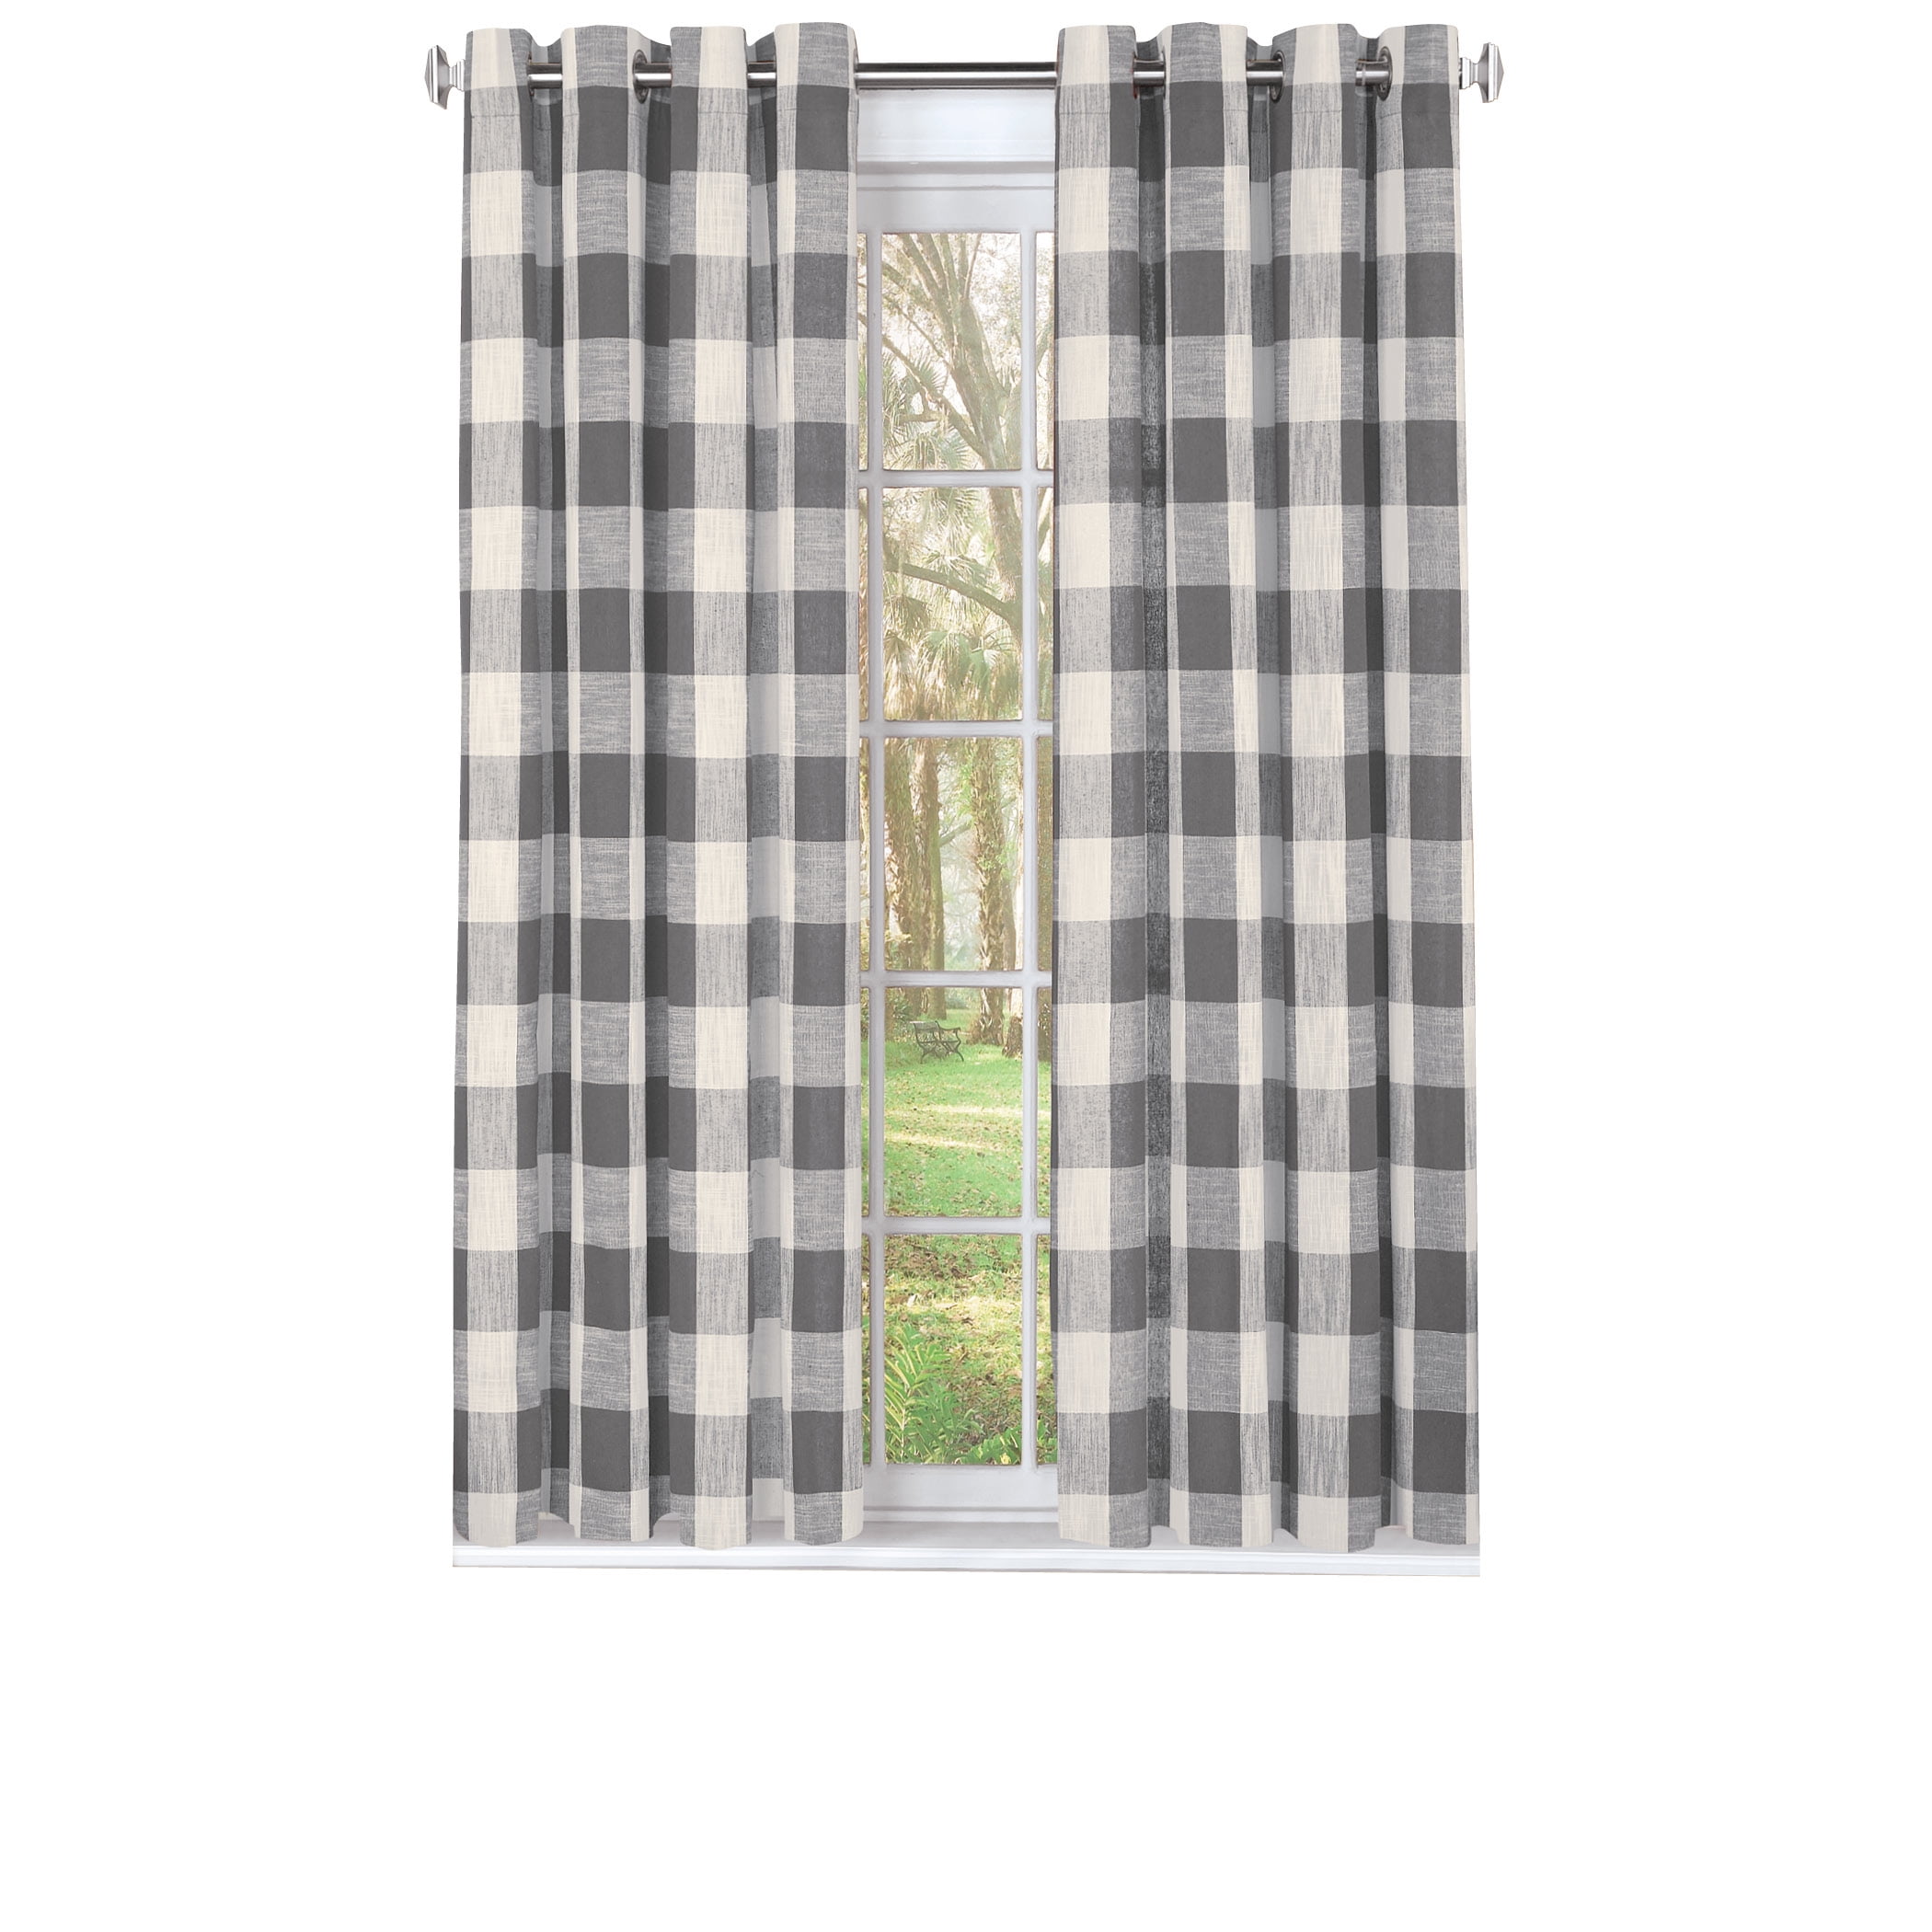 Lorraine 63" length Navy Courtyard Plaid Woven Curtain Panel with Grommets 